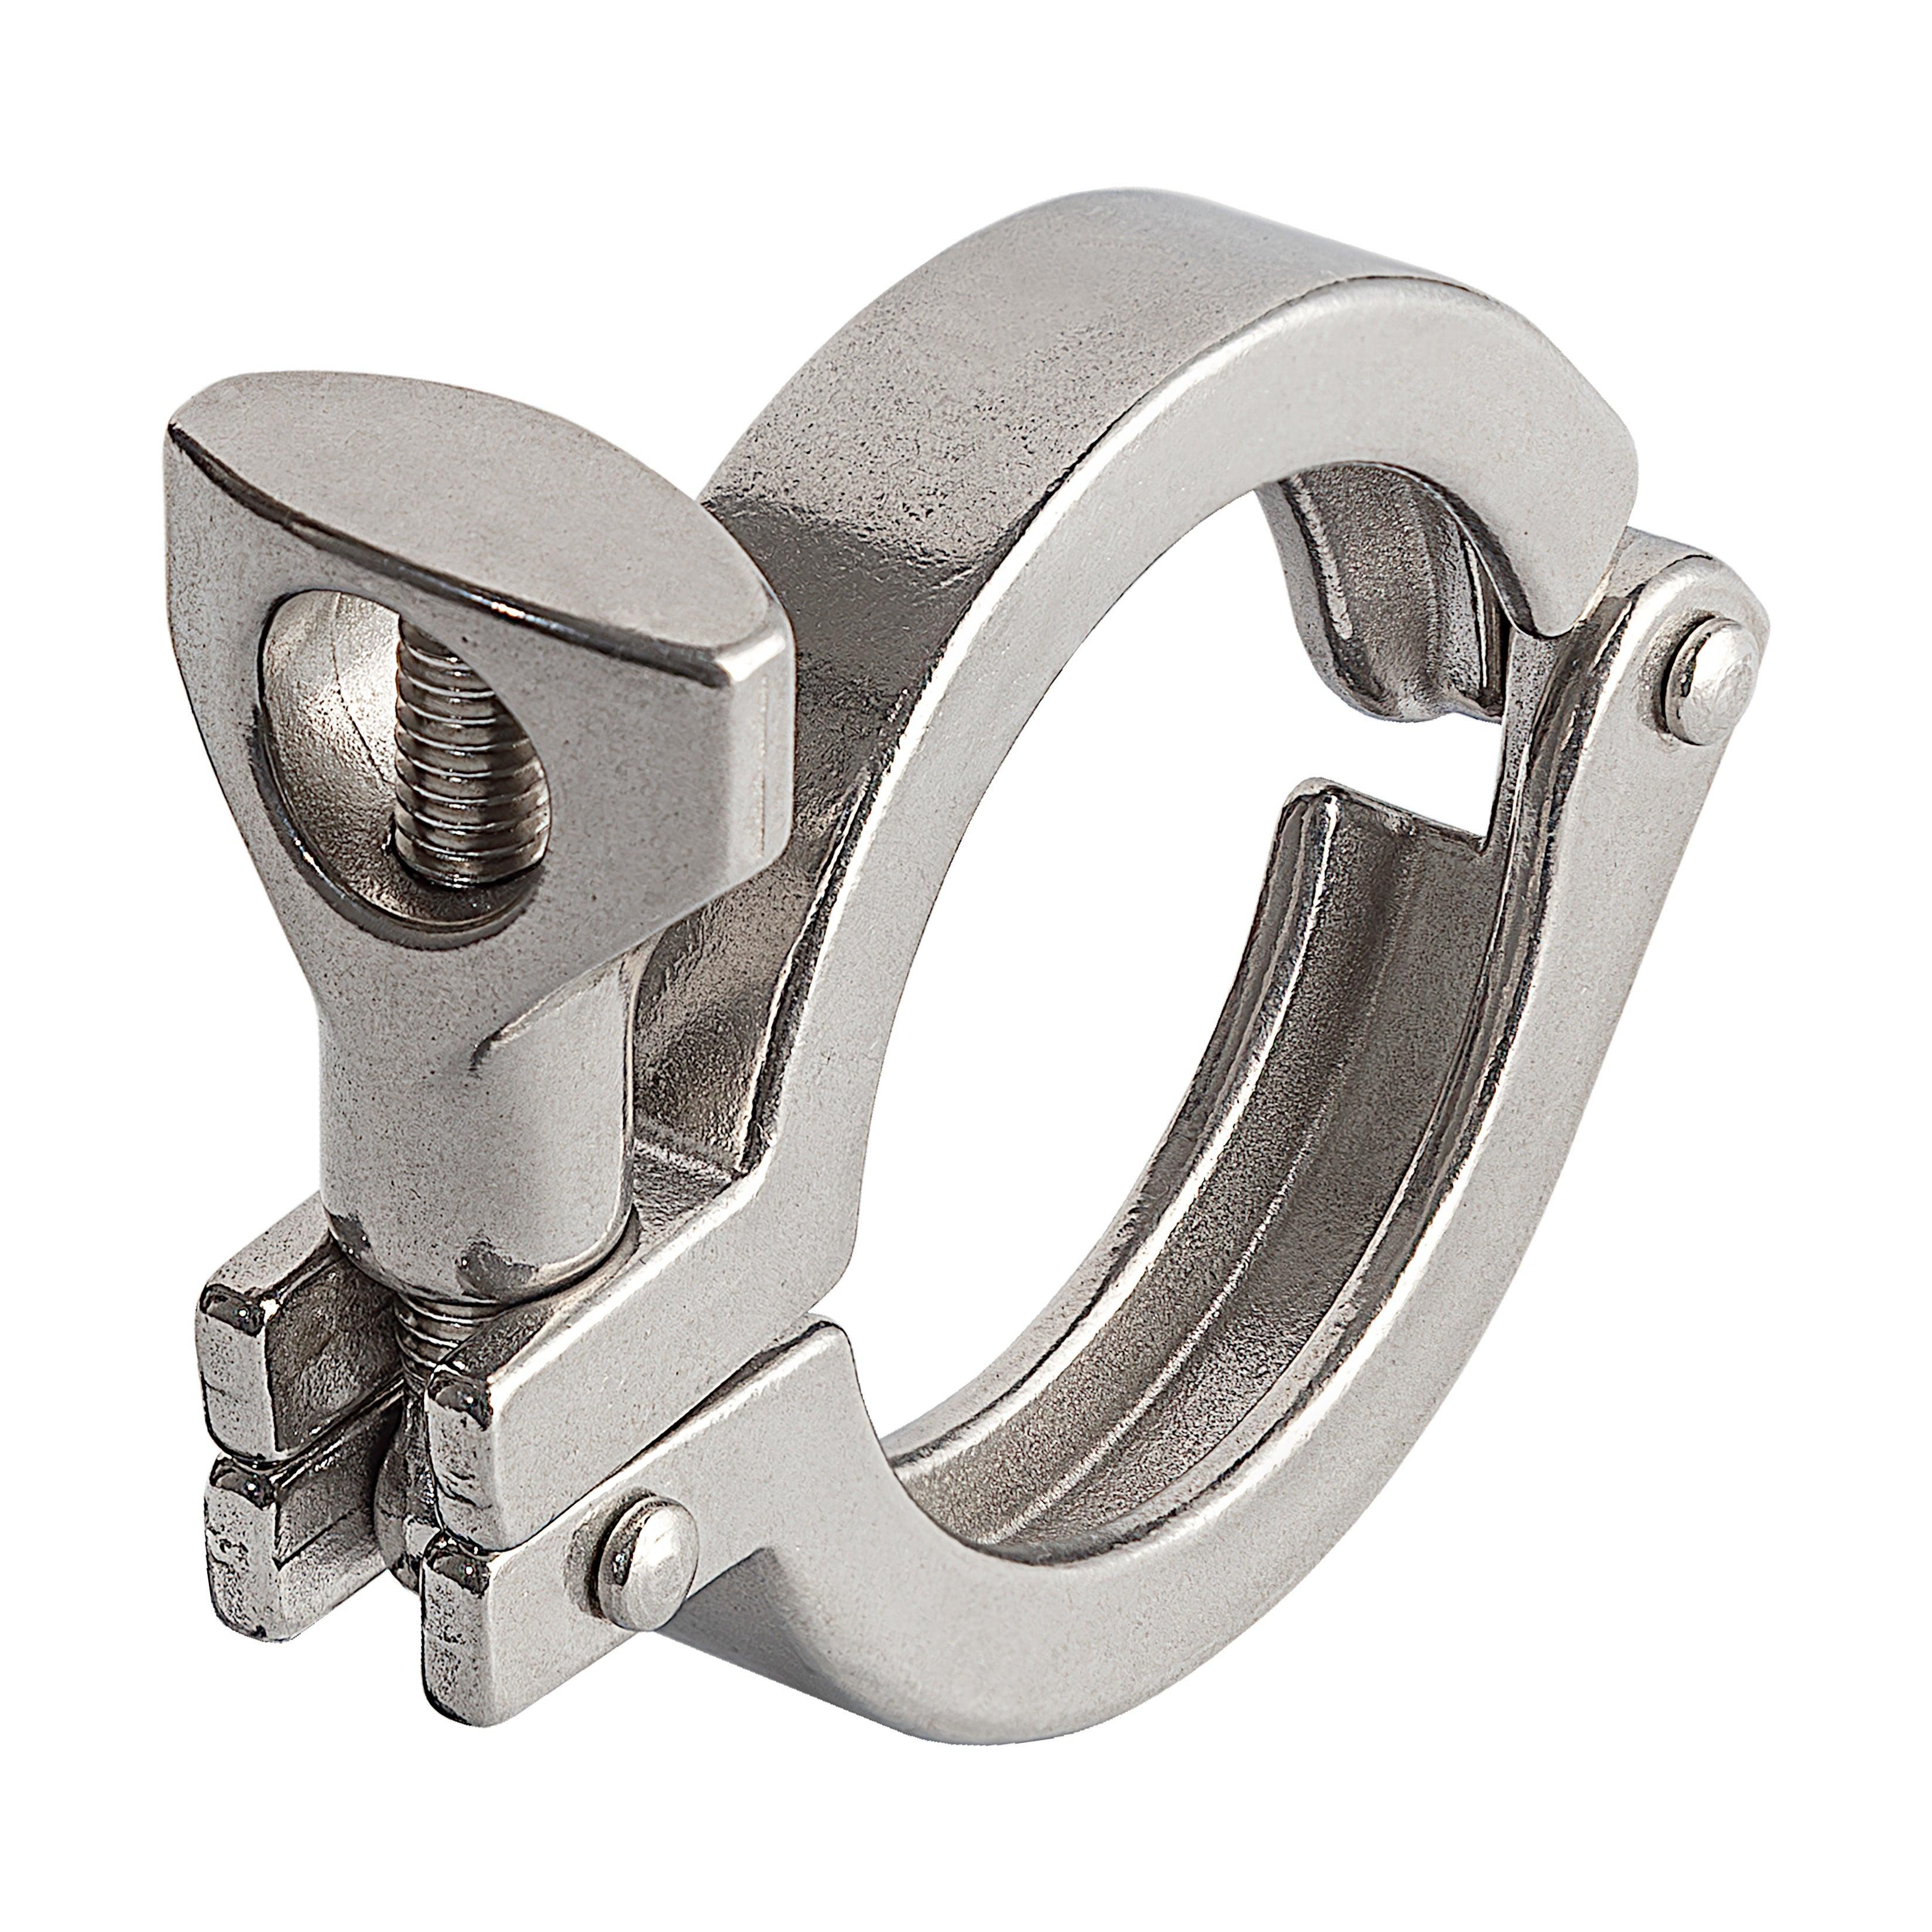 Single Pin Heavy Duty Clamp - Forces Inc